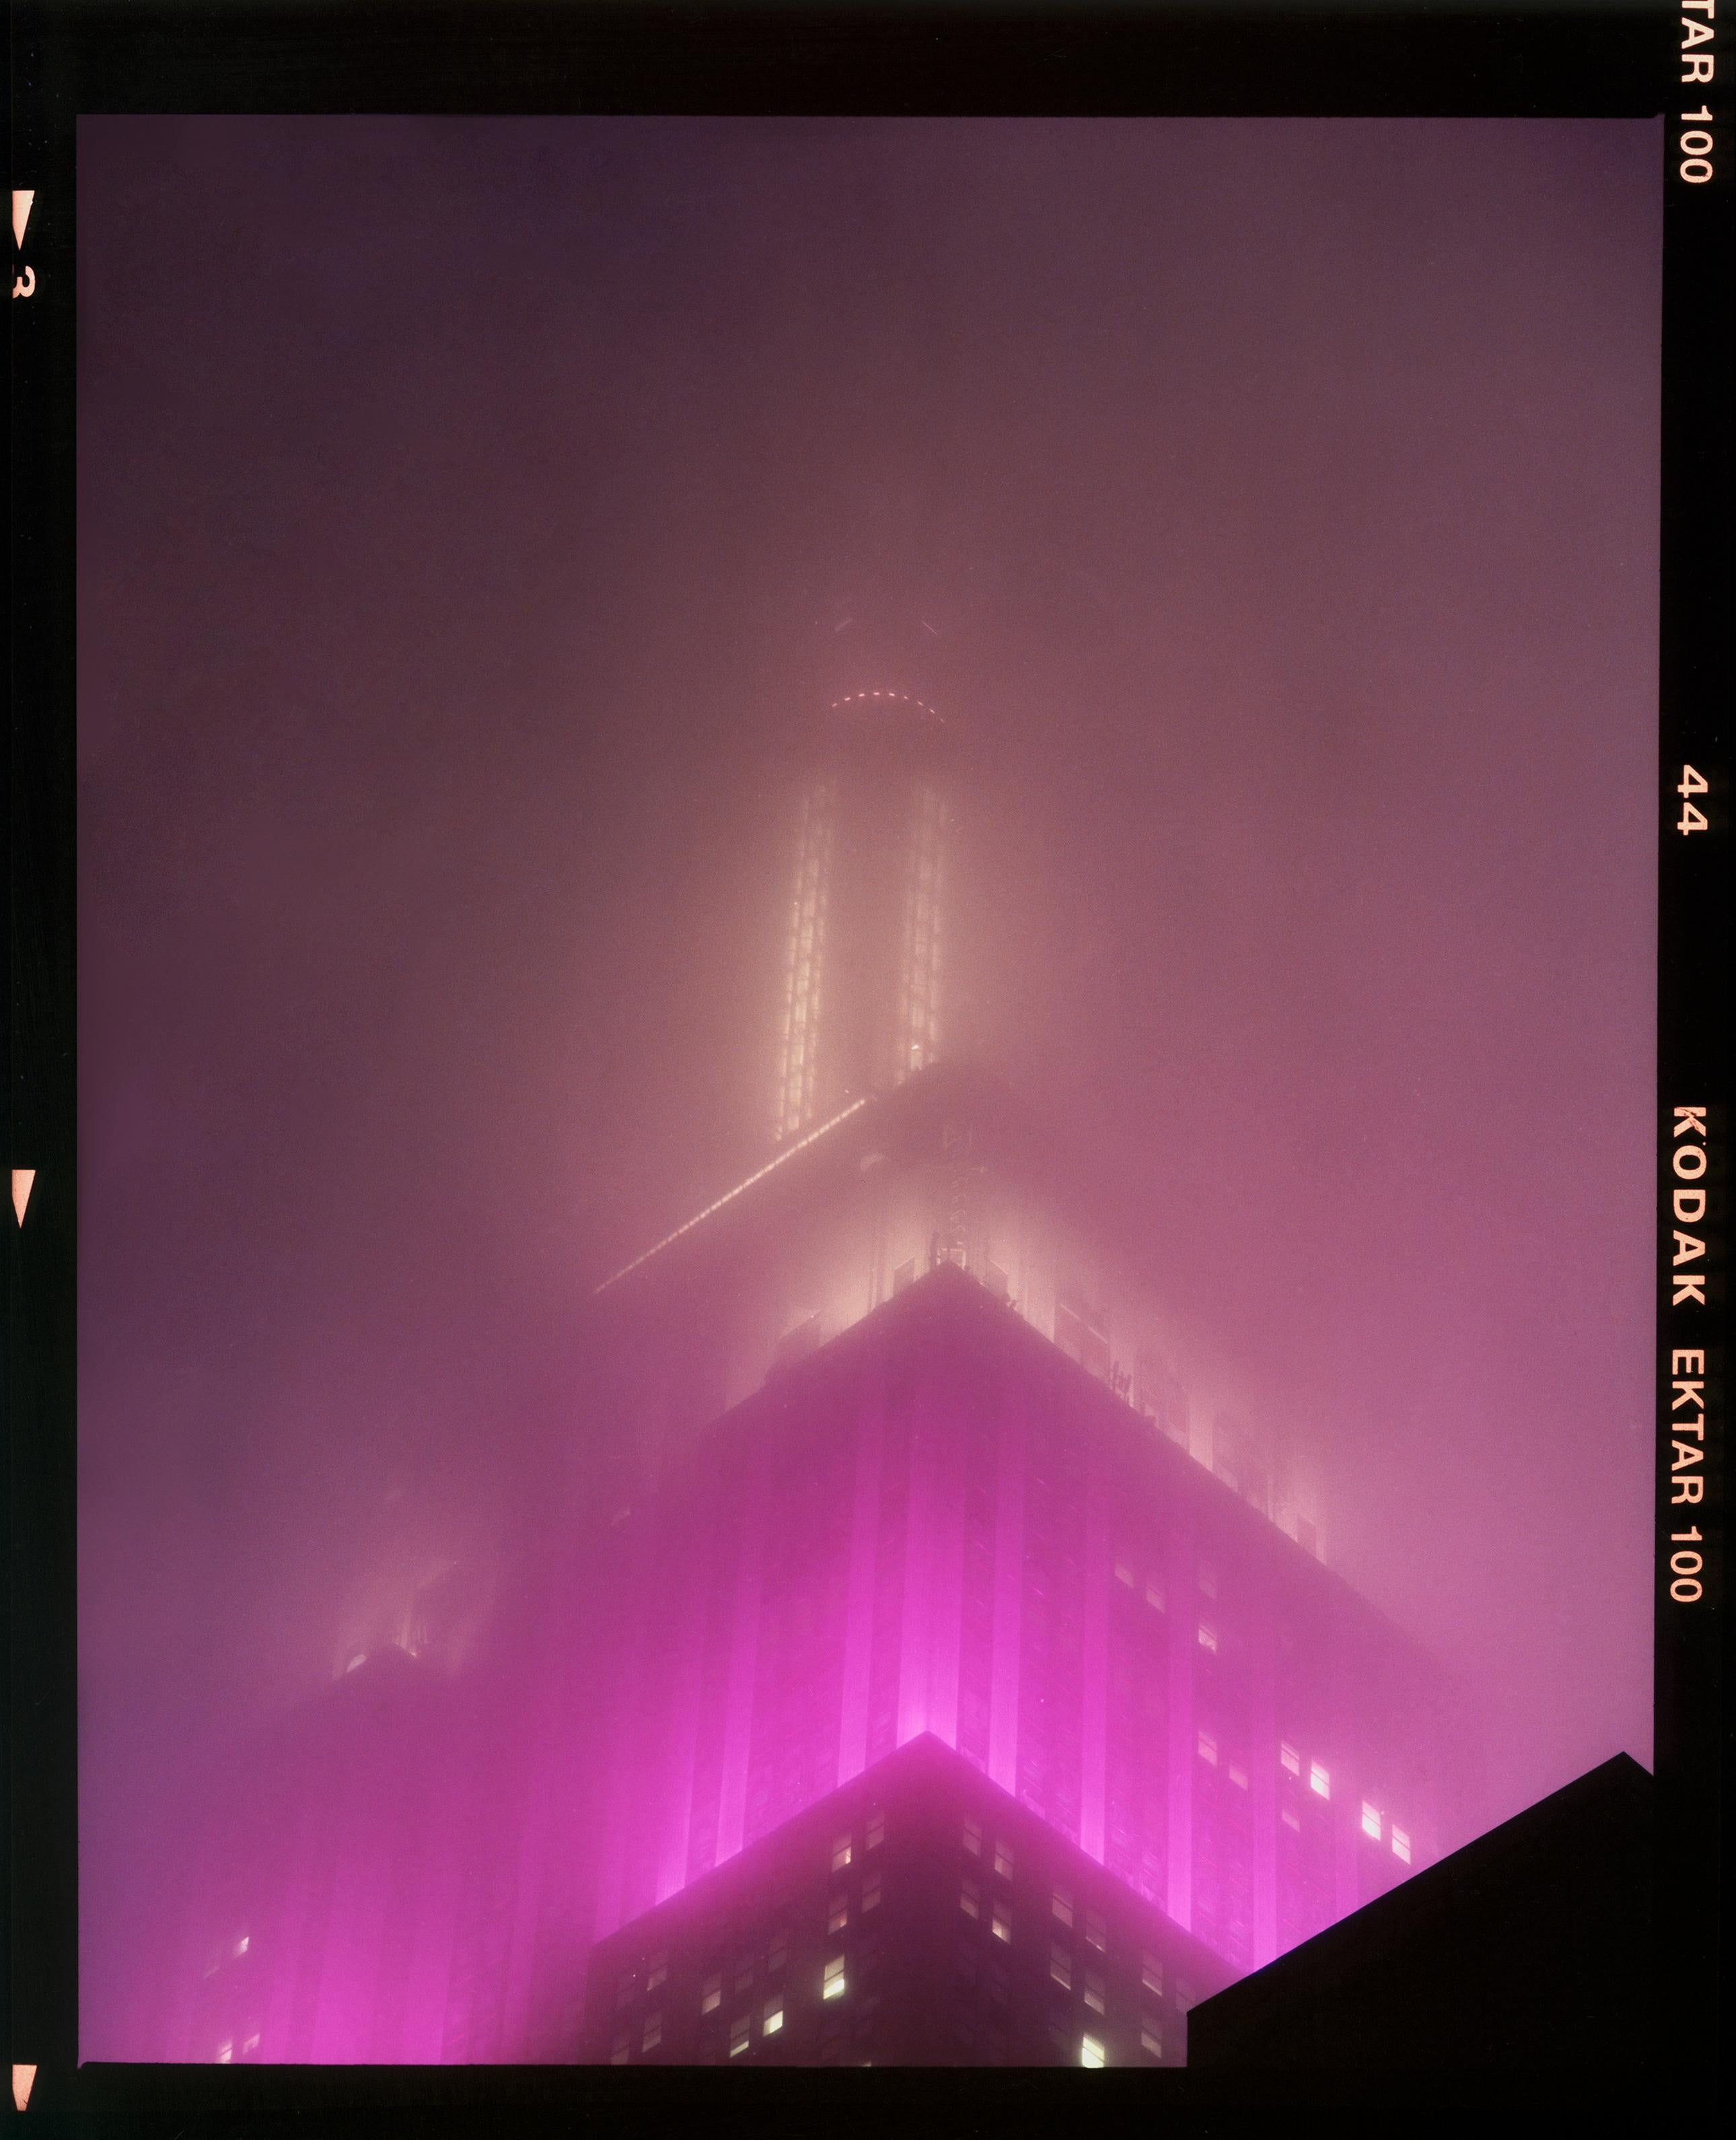 'NOMAD IX (Film Rebate)', New York. Richard Heeps has photographed the iconic Empire State building in the mist. The NOMAD sequence of photographs capture the art deco architecture illuminated by changing colours, and is part of Richard's street